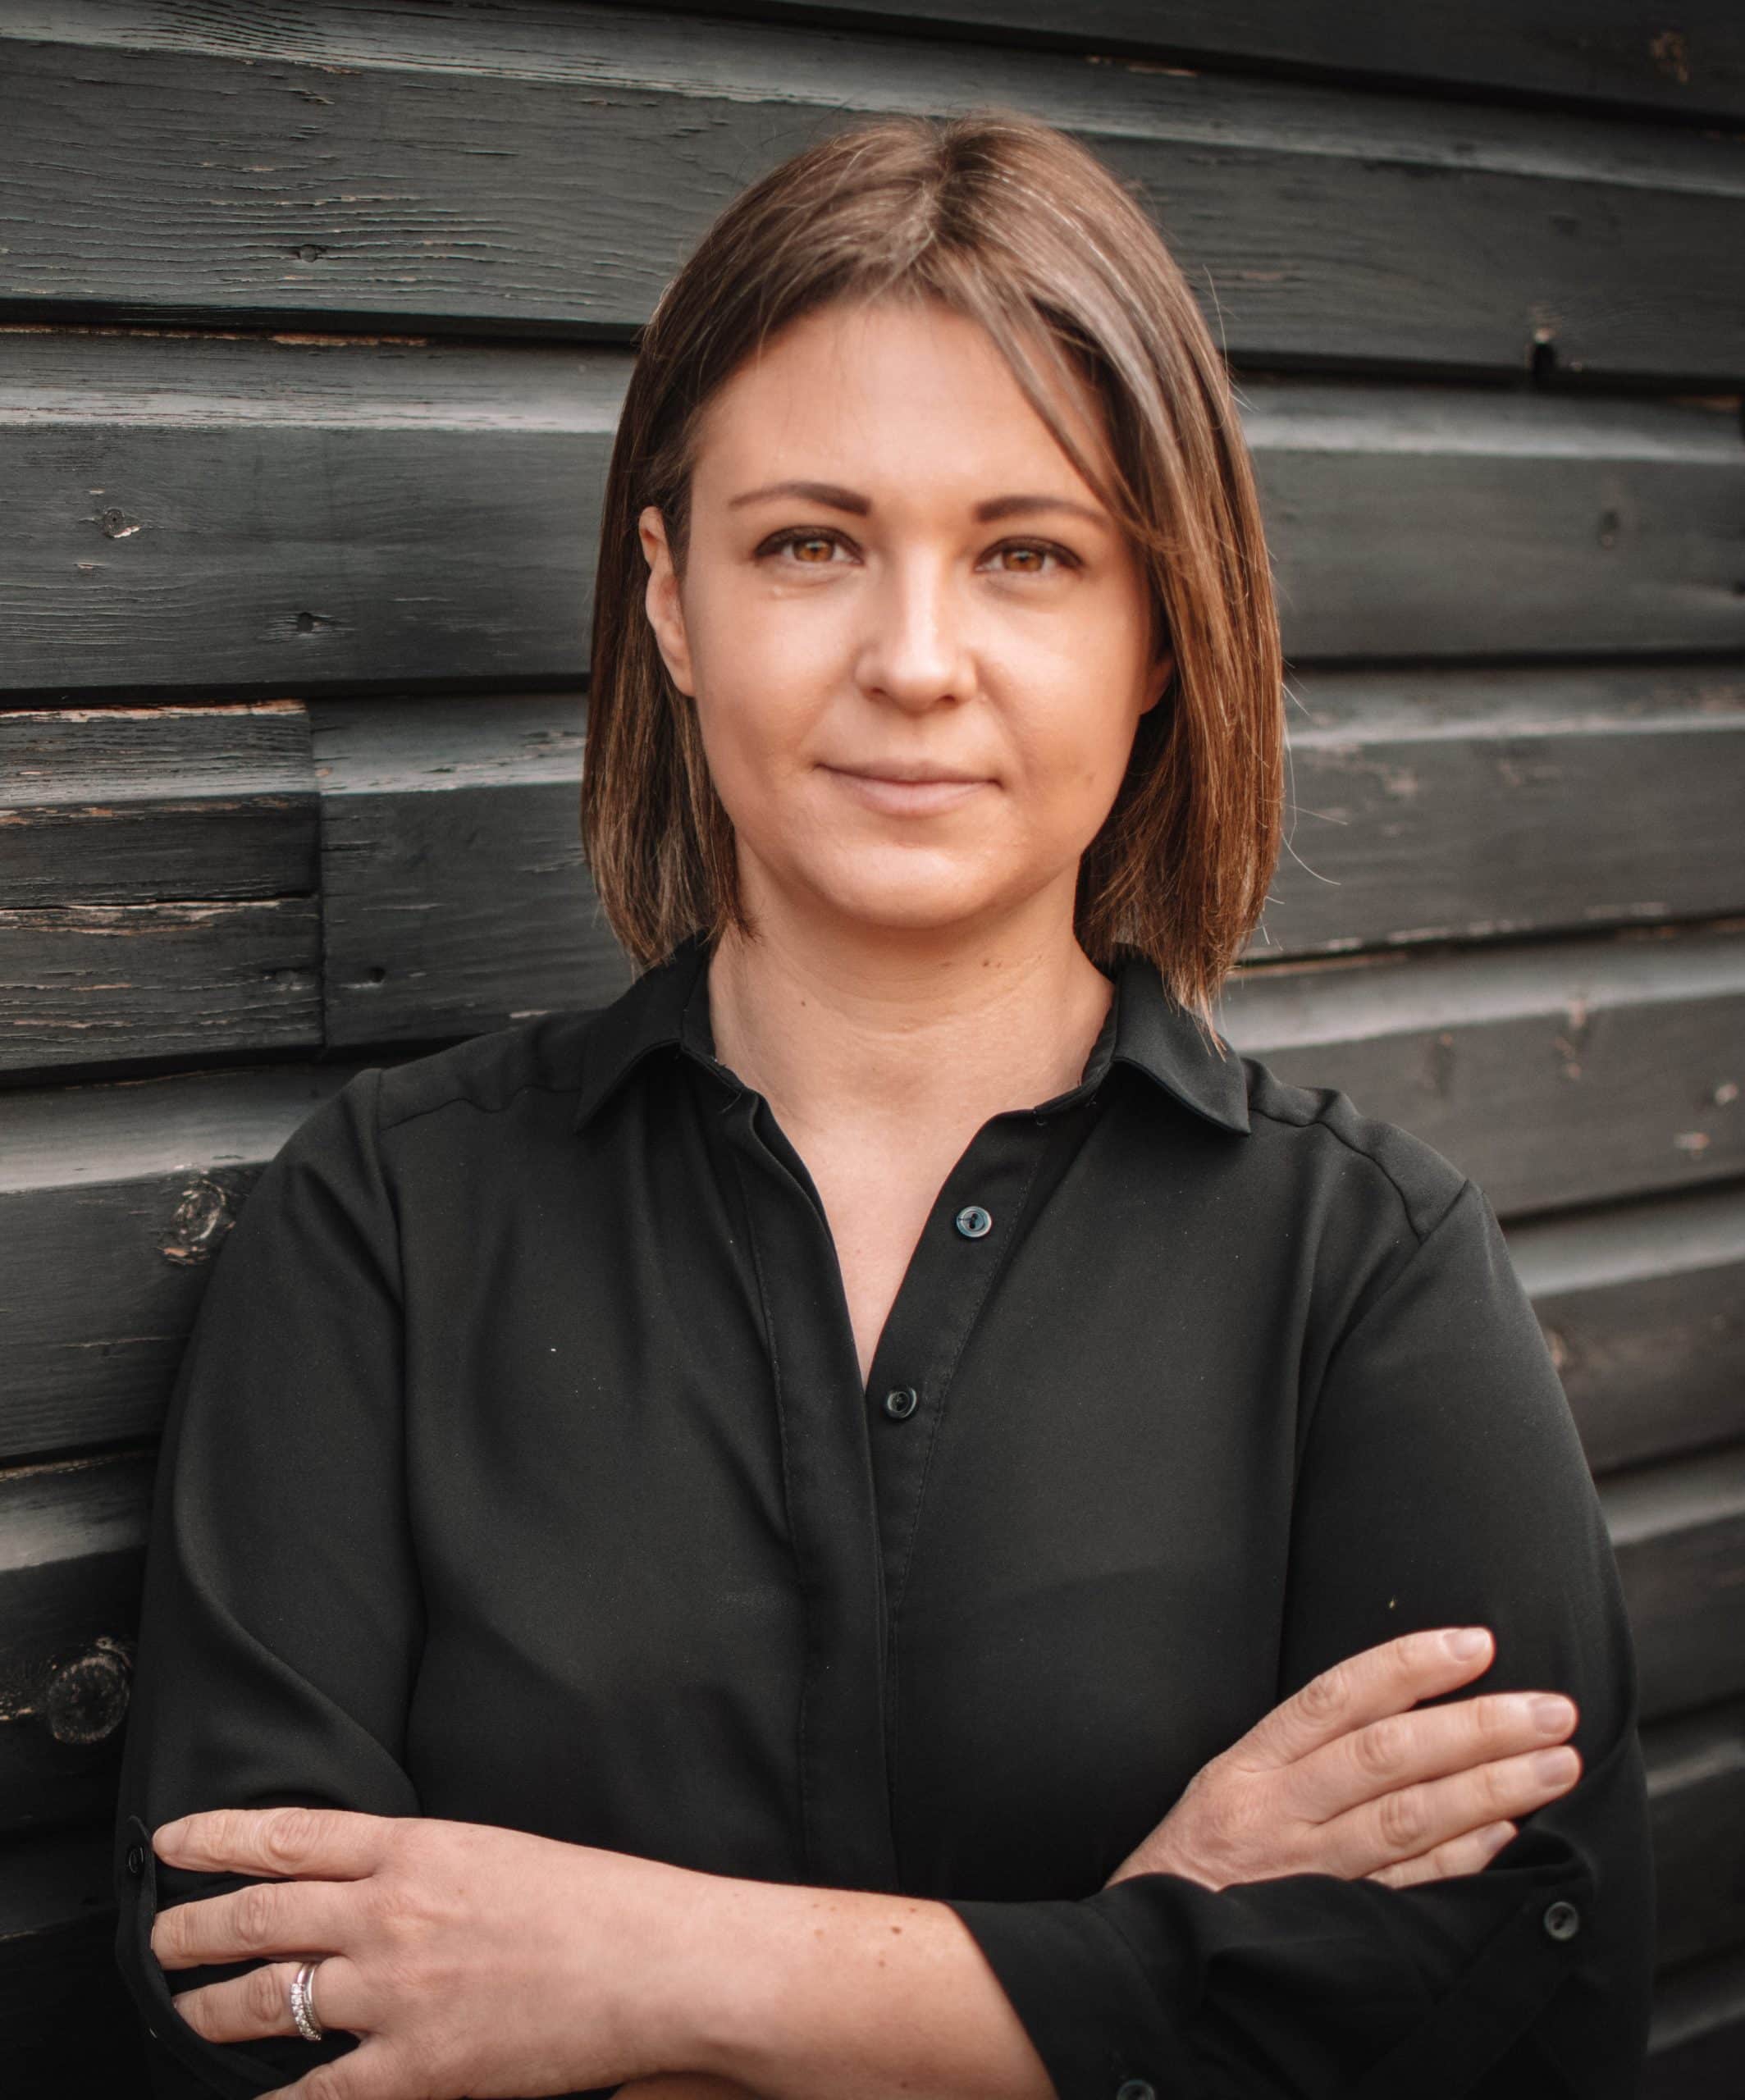 Emma Simkiss managing director freestyle agency vertical